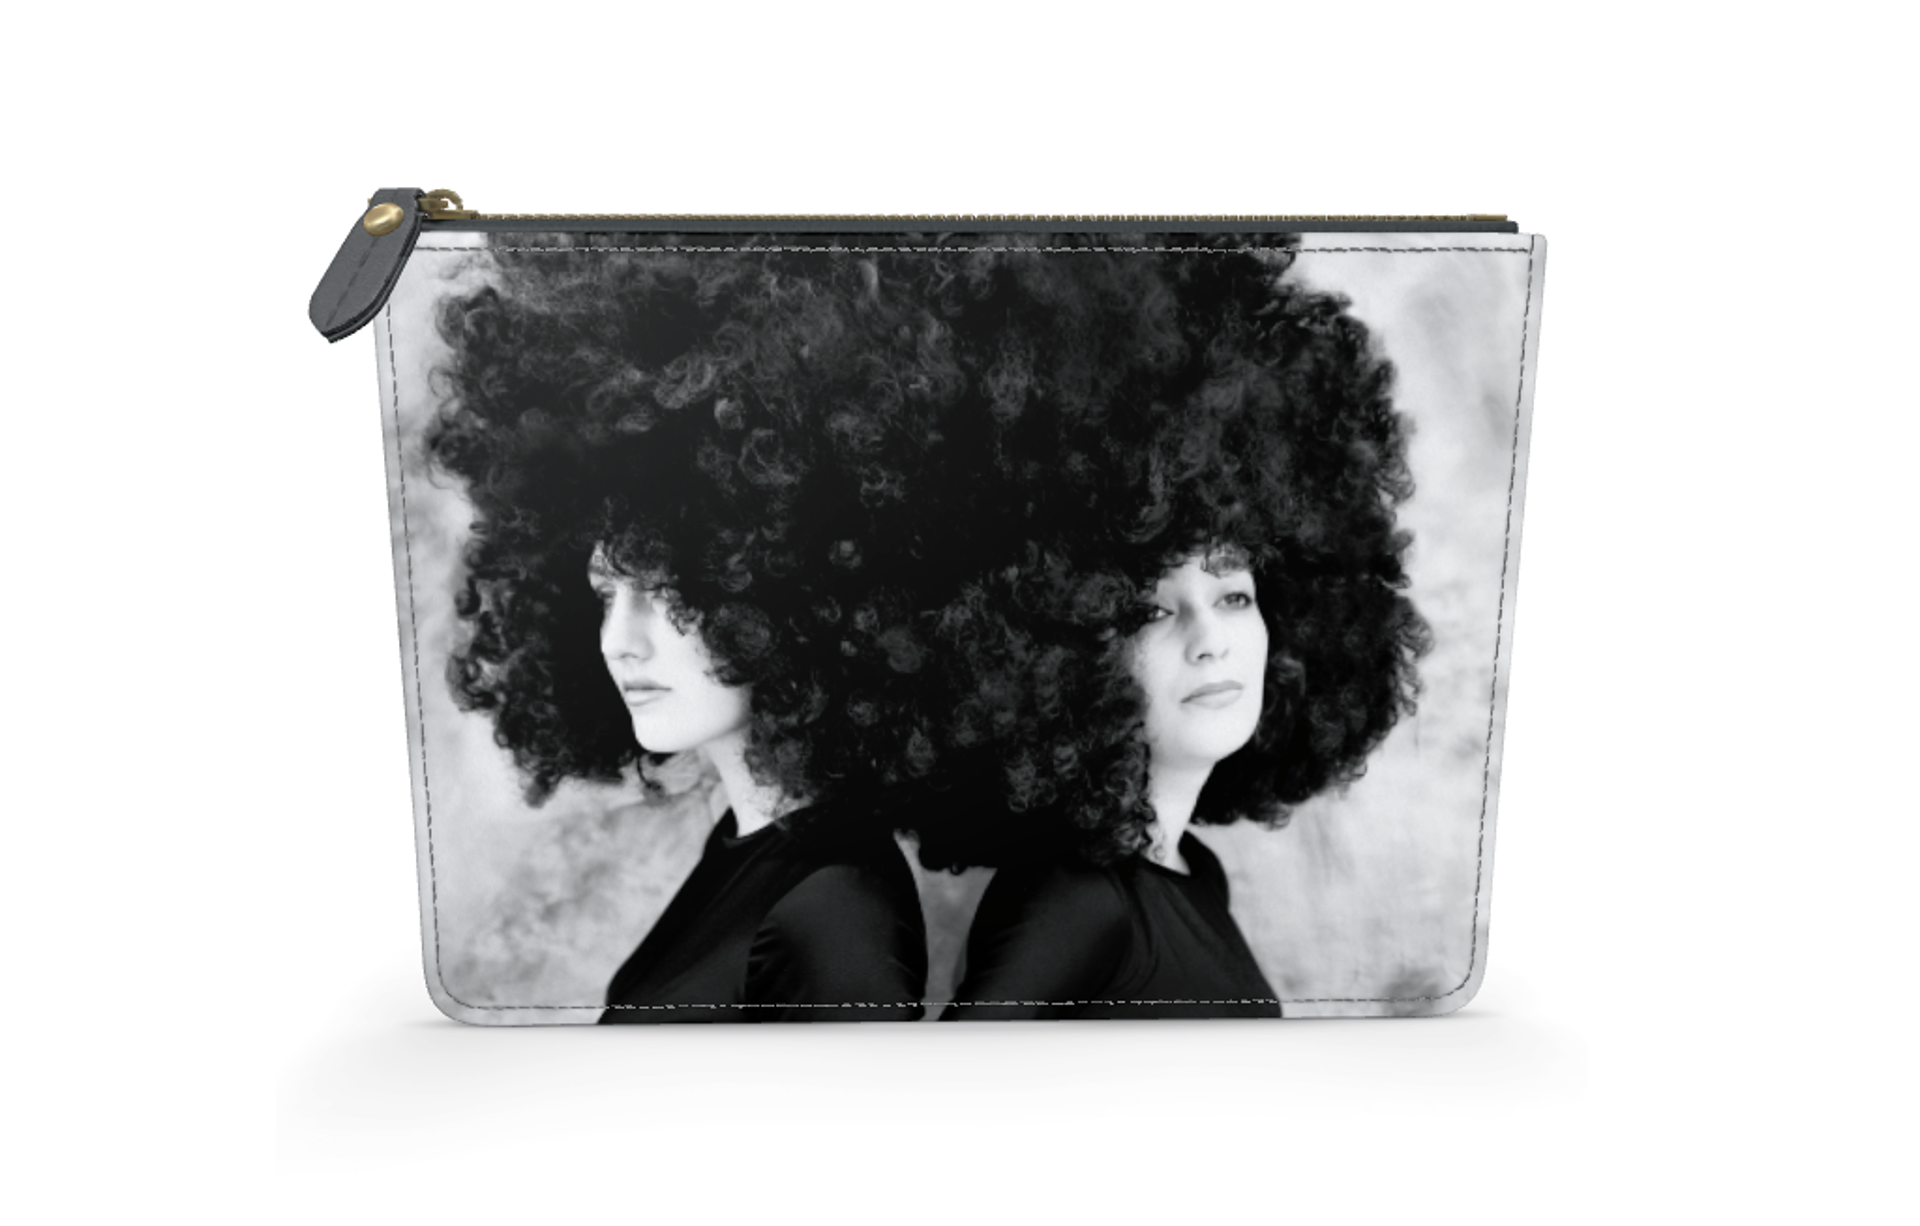 We're all in this together (large clutch) by Marjorie Salvaterra